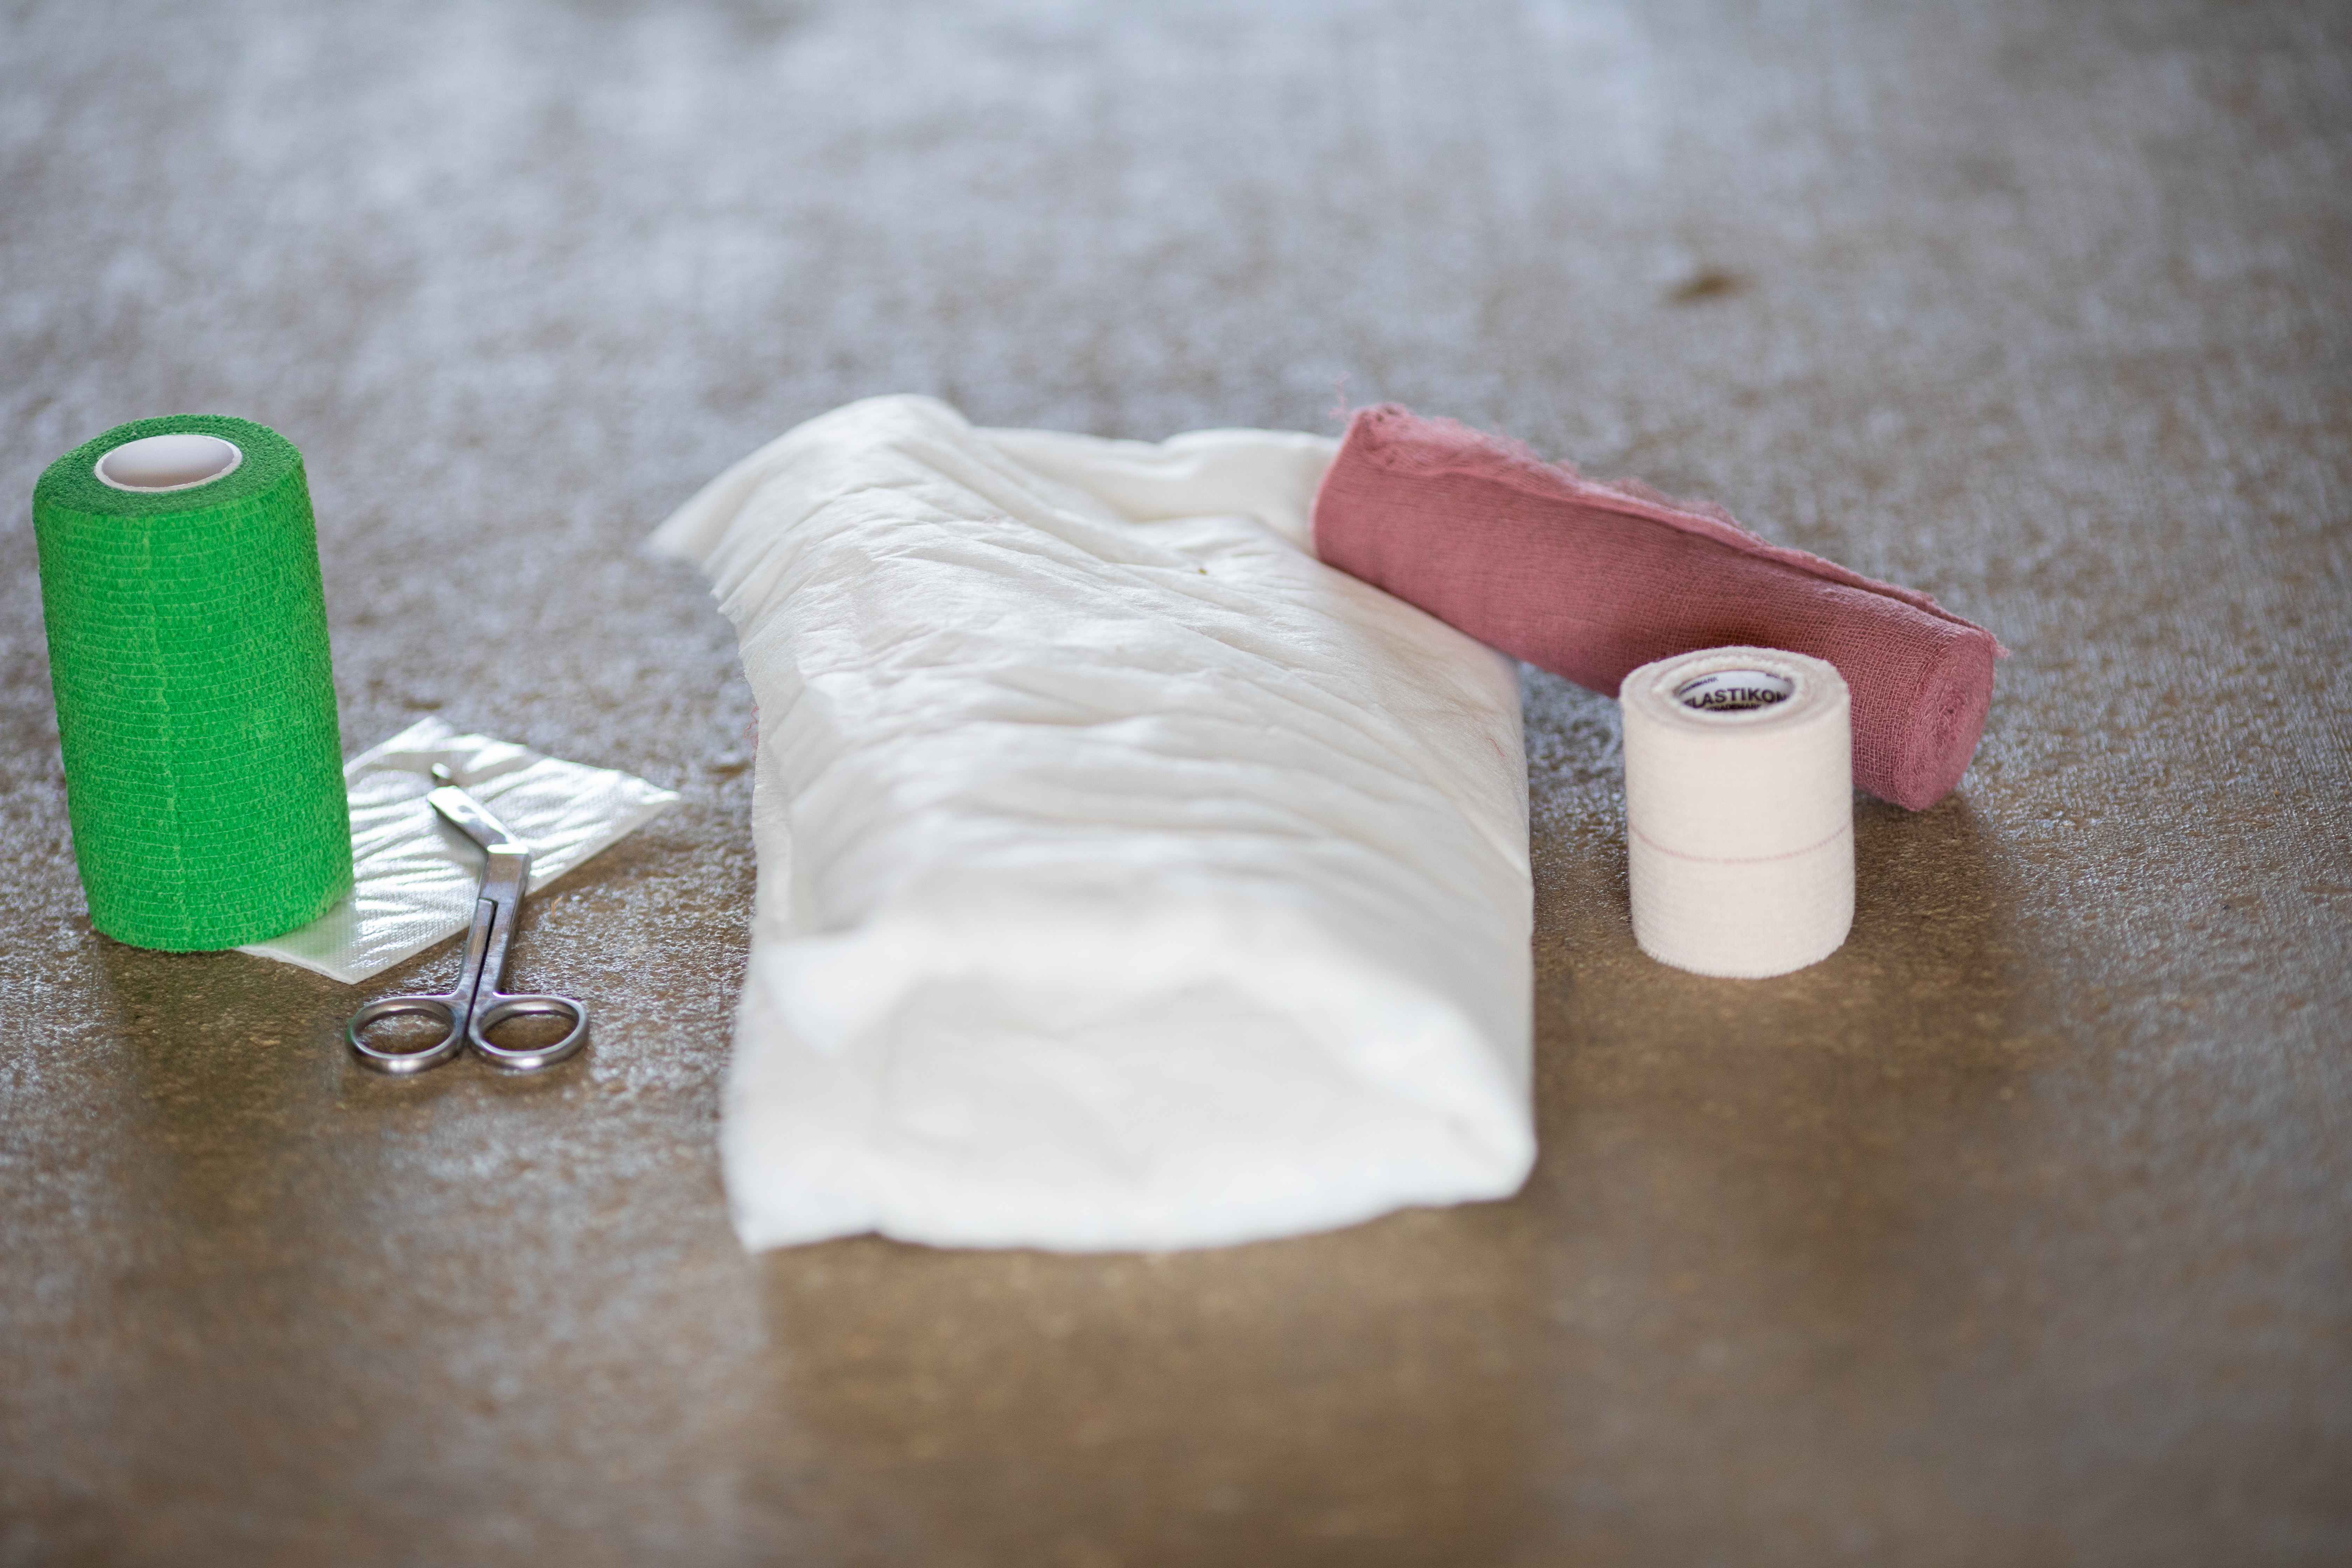 Bandaging items in an equine first-aid kit 